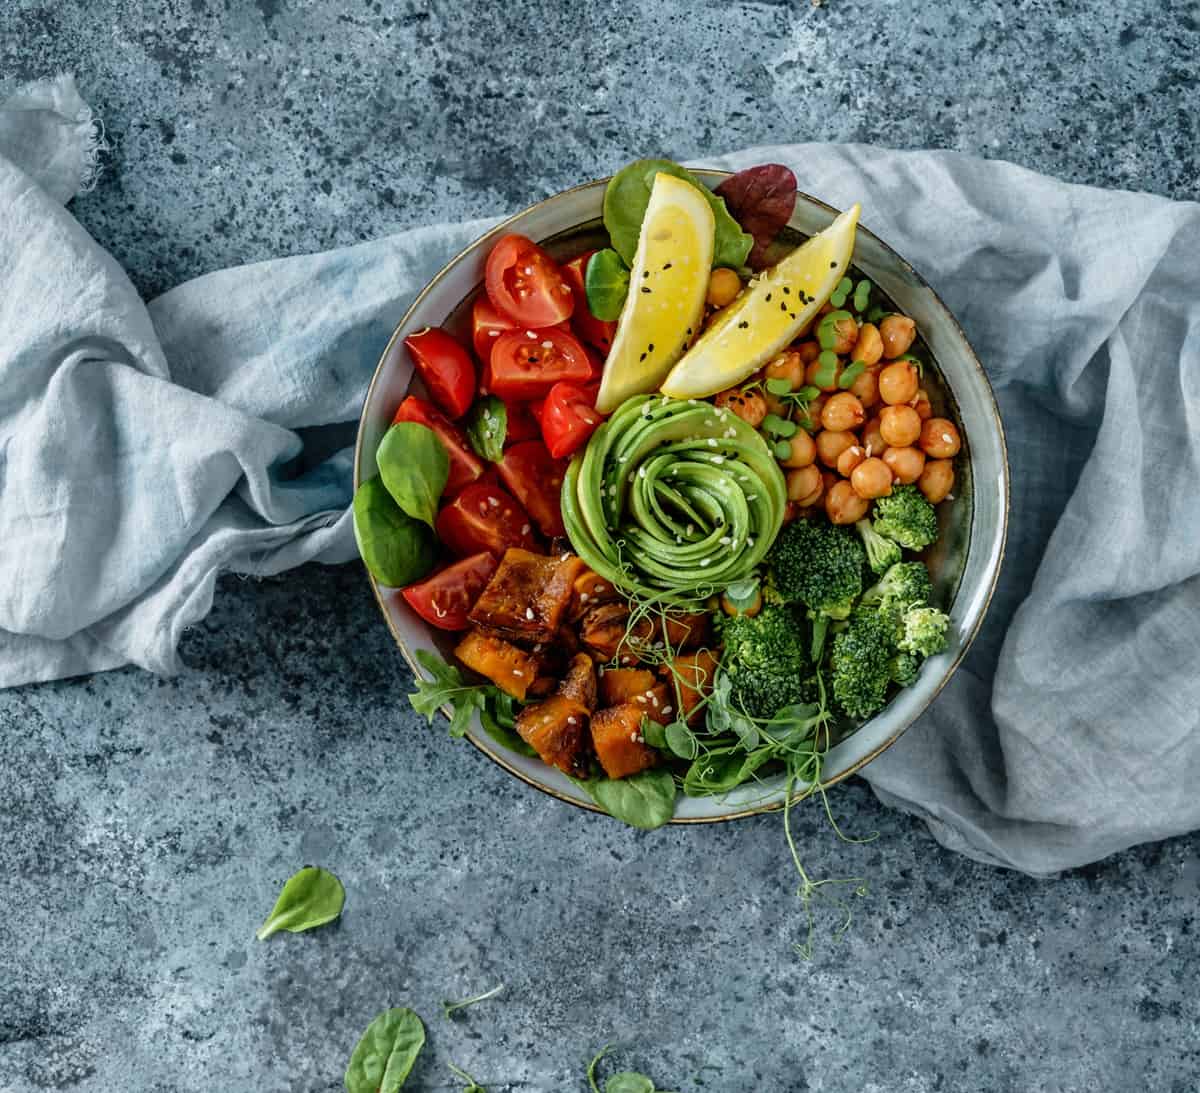 A healthy bowl of food with sweet potatoes, tomato, chickpeas, broccoli, and avocado.